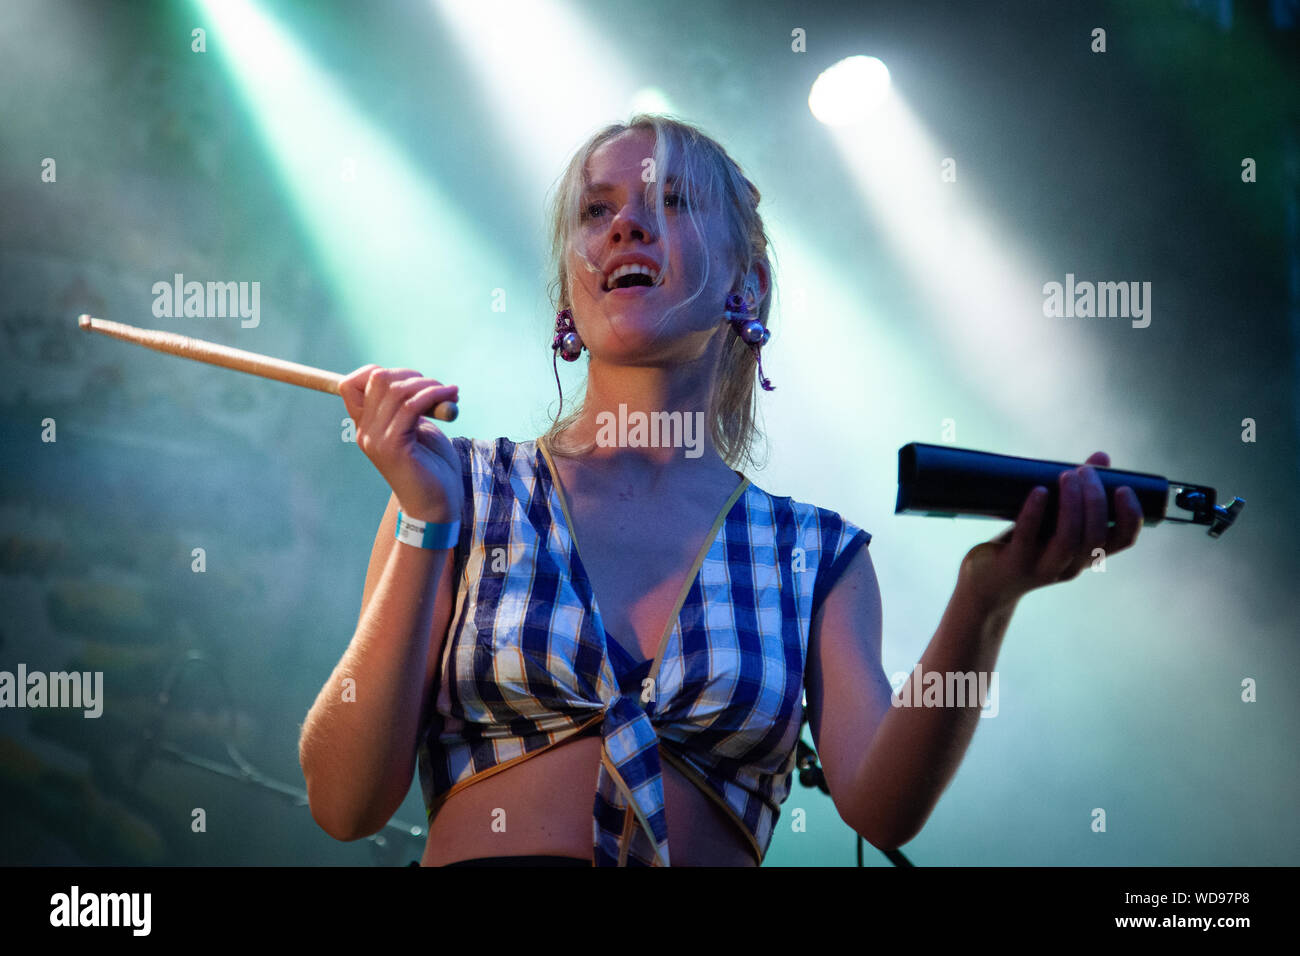 Trondheim, Norway. 16th, The Norwegian rock band Pom Poko performs a live concert during the Norwegian music festival Pstereo 2019 in Trondheim. Here singer Ragnhild Fangel is seen live on